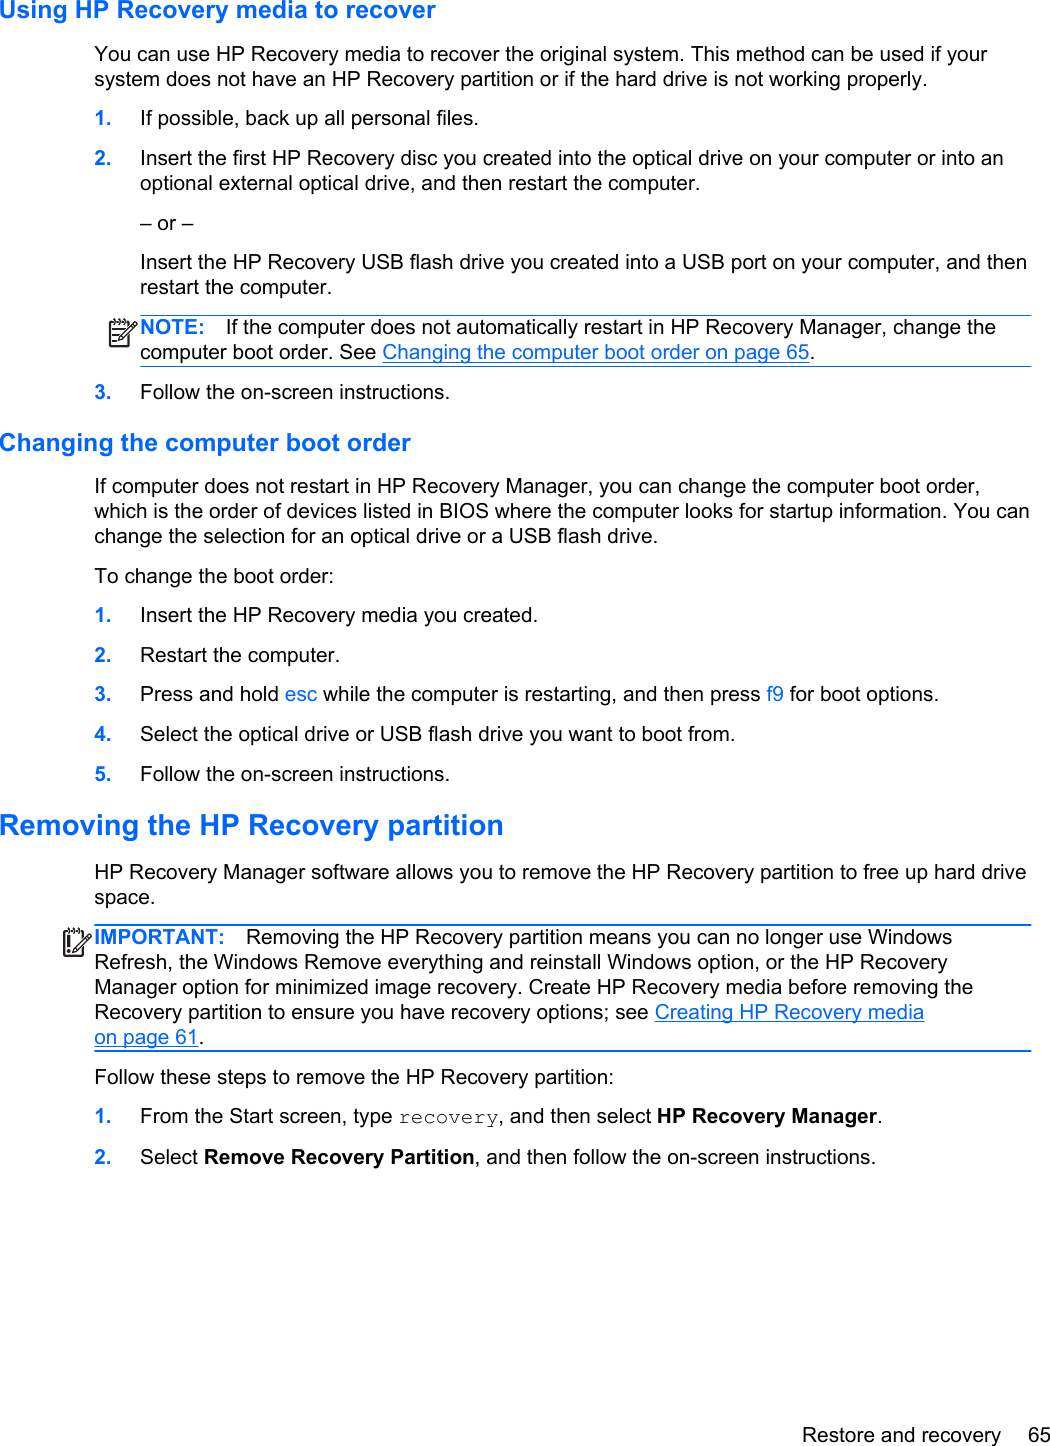 Using HP Recovery media to recoverYou can use HP Recovery media to recover the original system. This method can be used if yoursystem does not have an HP Recovery partition or if the hard drive is not working properly.1. If possible, back up all personal files.2. Insert the first HP Recovery disc you created into the optical drive on your computer or into anoptional external optical drive, and then restart the computer.– or –Insert the HP Recovery USB flash drive you created into a USB port on your computer, and thenrestart the computer.NOTE: If the computer does not automatically restart in HP Recovery Manager, change thecomputer boot order. See Changing the computer boot order on page 65.3. Follow the on-screen instructions.Changing the computer boot orderIf computer does not restart in HP Recovery Manager, you can change the computer boot order,which is the order of devices listed in BIOS where the computer looks for startup information. You canchange the selection for an optical drive or a USB flash drive.To change the boot order:1. Insert the HP Recovery media you created.2. Restart the computer.3. Press and hold esc while the computer is restarting, and then press f9 for boot options.4. Select the optical drive or USB flash drive you want to boot from.5. Follow the on-screen instructions.Removing the HP Recovery partitionHP Recovery Manager software allows you to remove the HP Recovery partition to free up hard drivespace.IMPORTANT: Removing the HP Recovery partition means you can no longer use WindowsRefresh, the Windows Remove everything and reinstall Windows option, or the HP RecoveryManager option for minimized image recovery. Create HP Recovery media before removing theRecovery partition to ensure you have recovery options; see Creating HP Recovery mediaon page 61.Follow these steps to remove the HP Recovery partition:1. From the Start screen, type recovery, and then select HP Recovery Manager.2. Select Remove Recovery Partition, and then follow the on-screen instructions.Restore and recovery 65